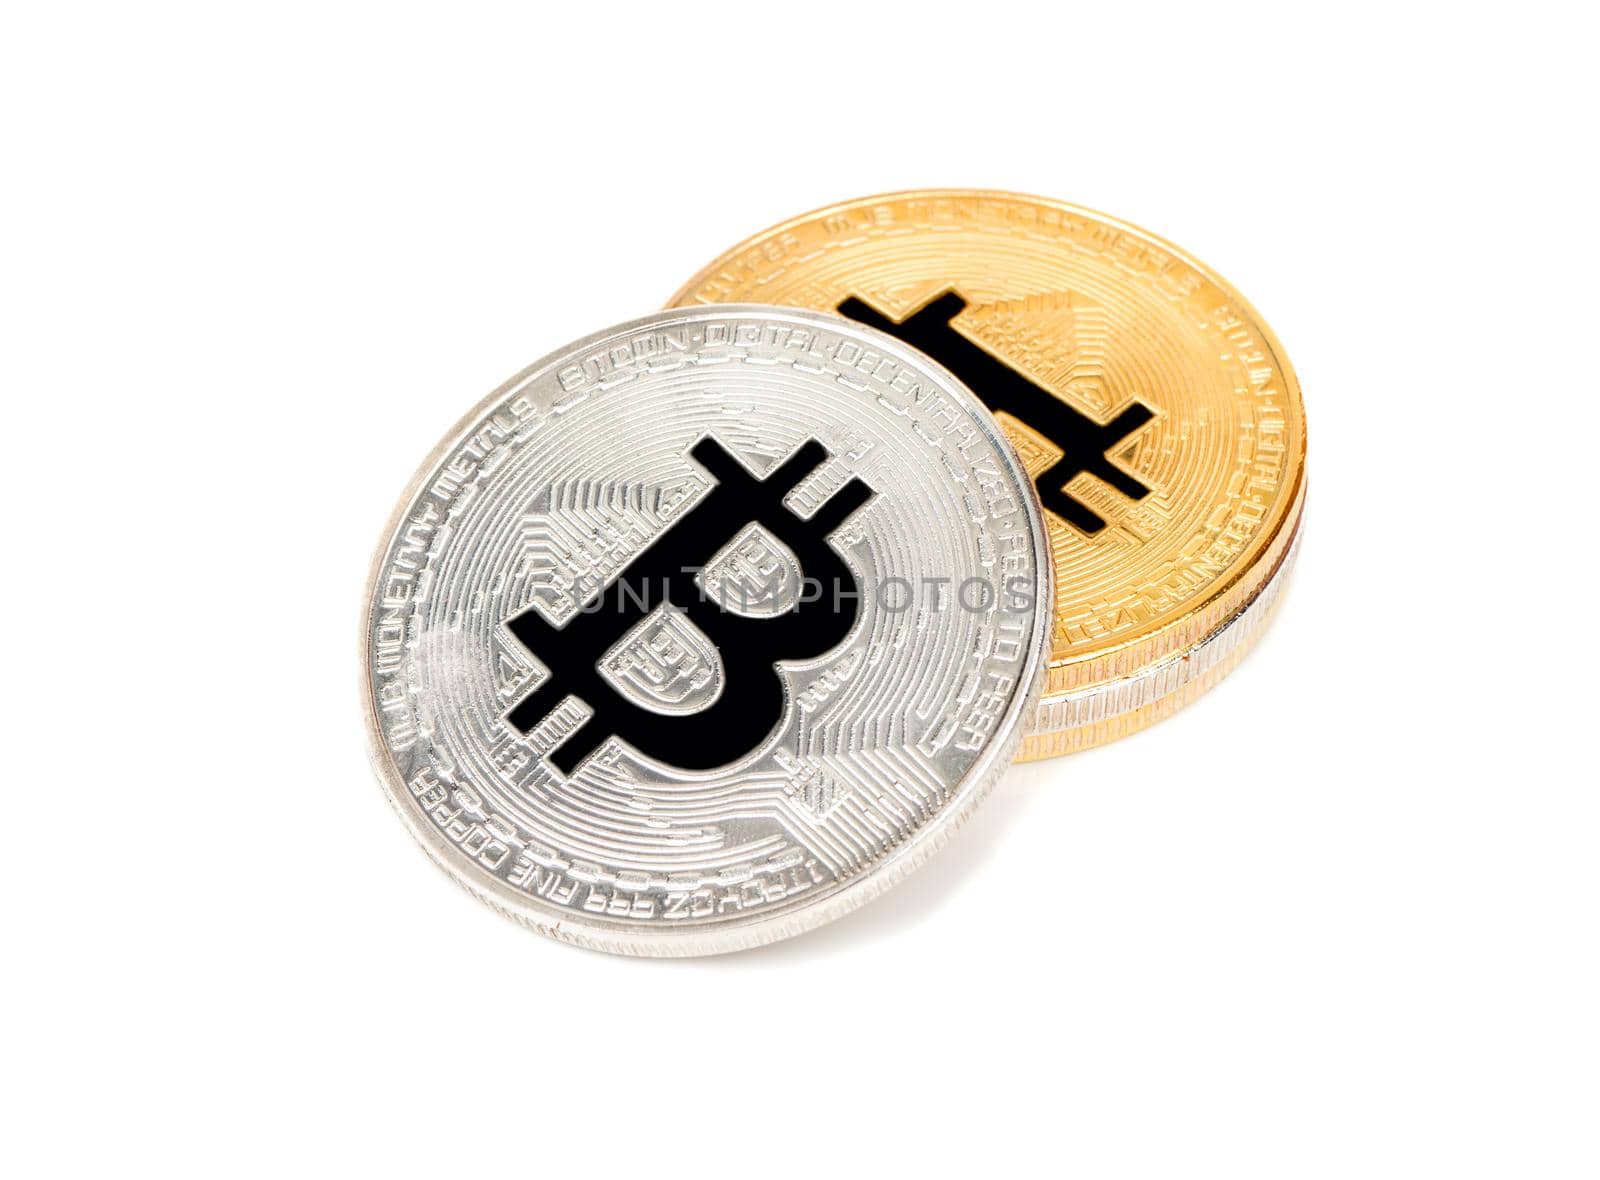 Stack of silver and gold bitcoins on a white background